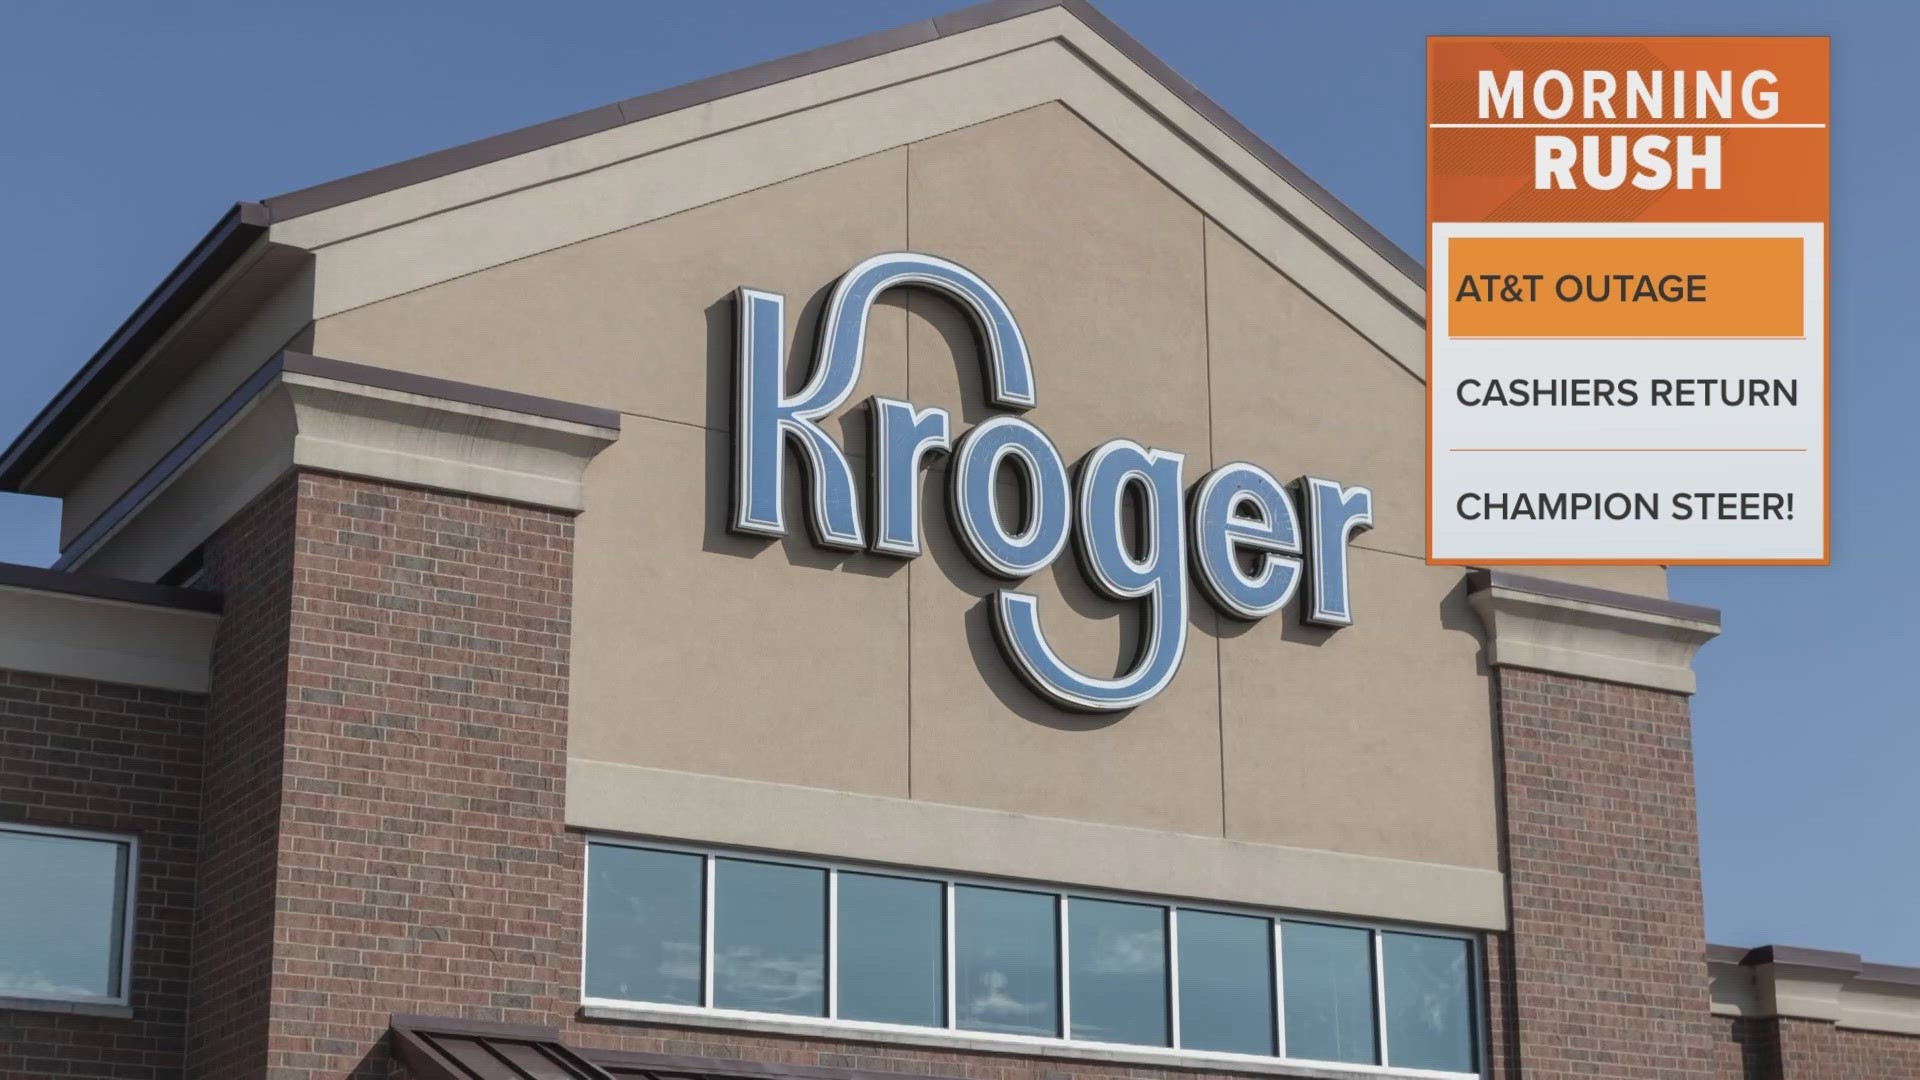 The Kroger location will still have self-checkout lanes, like all Kroger stores. It just won't be the exclusive checkout format anymore.